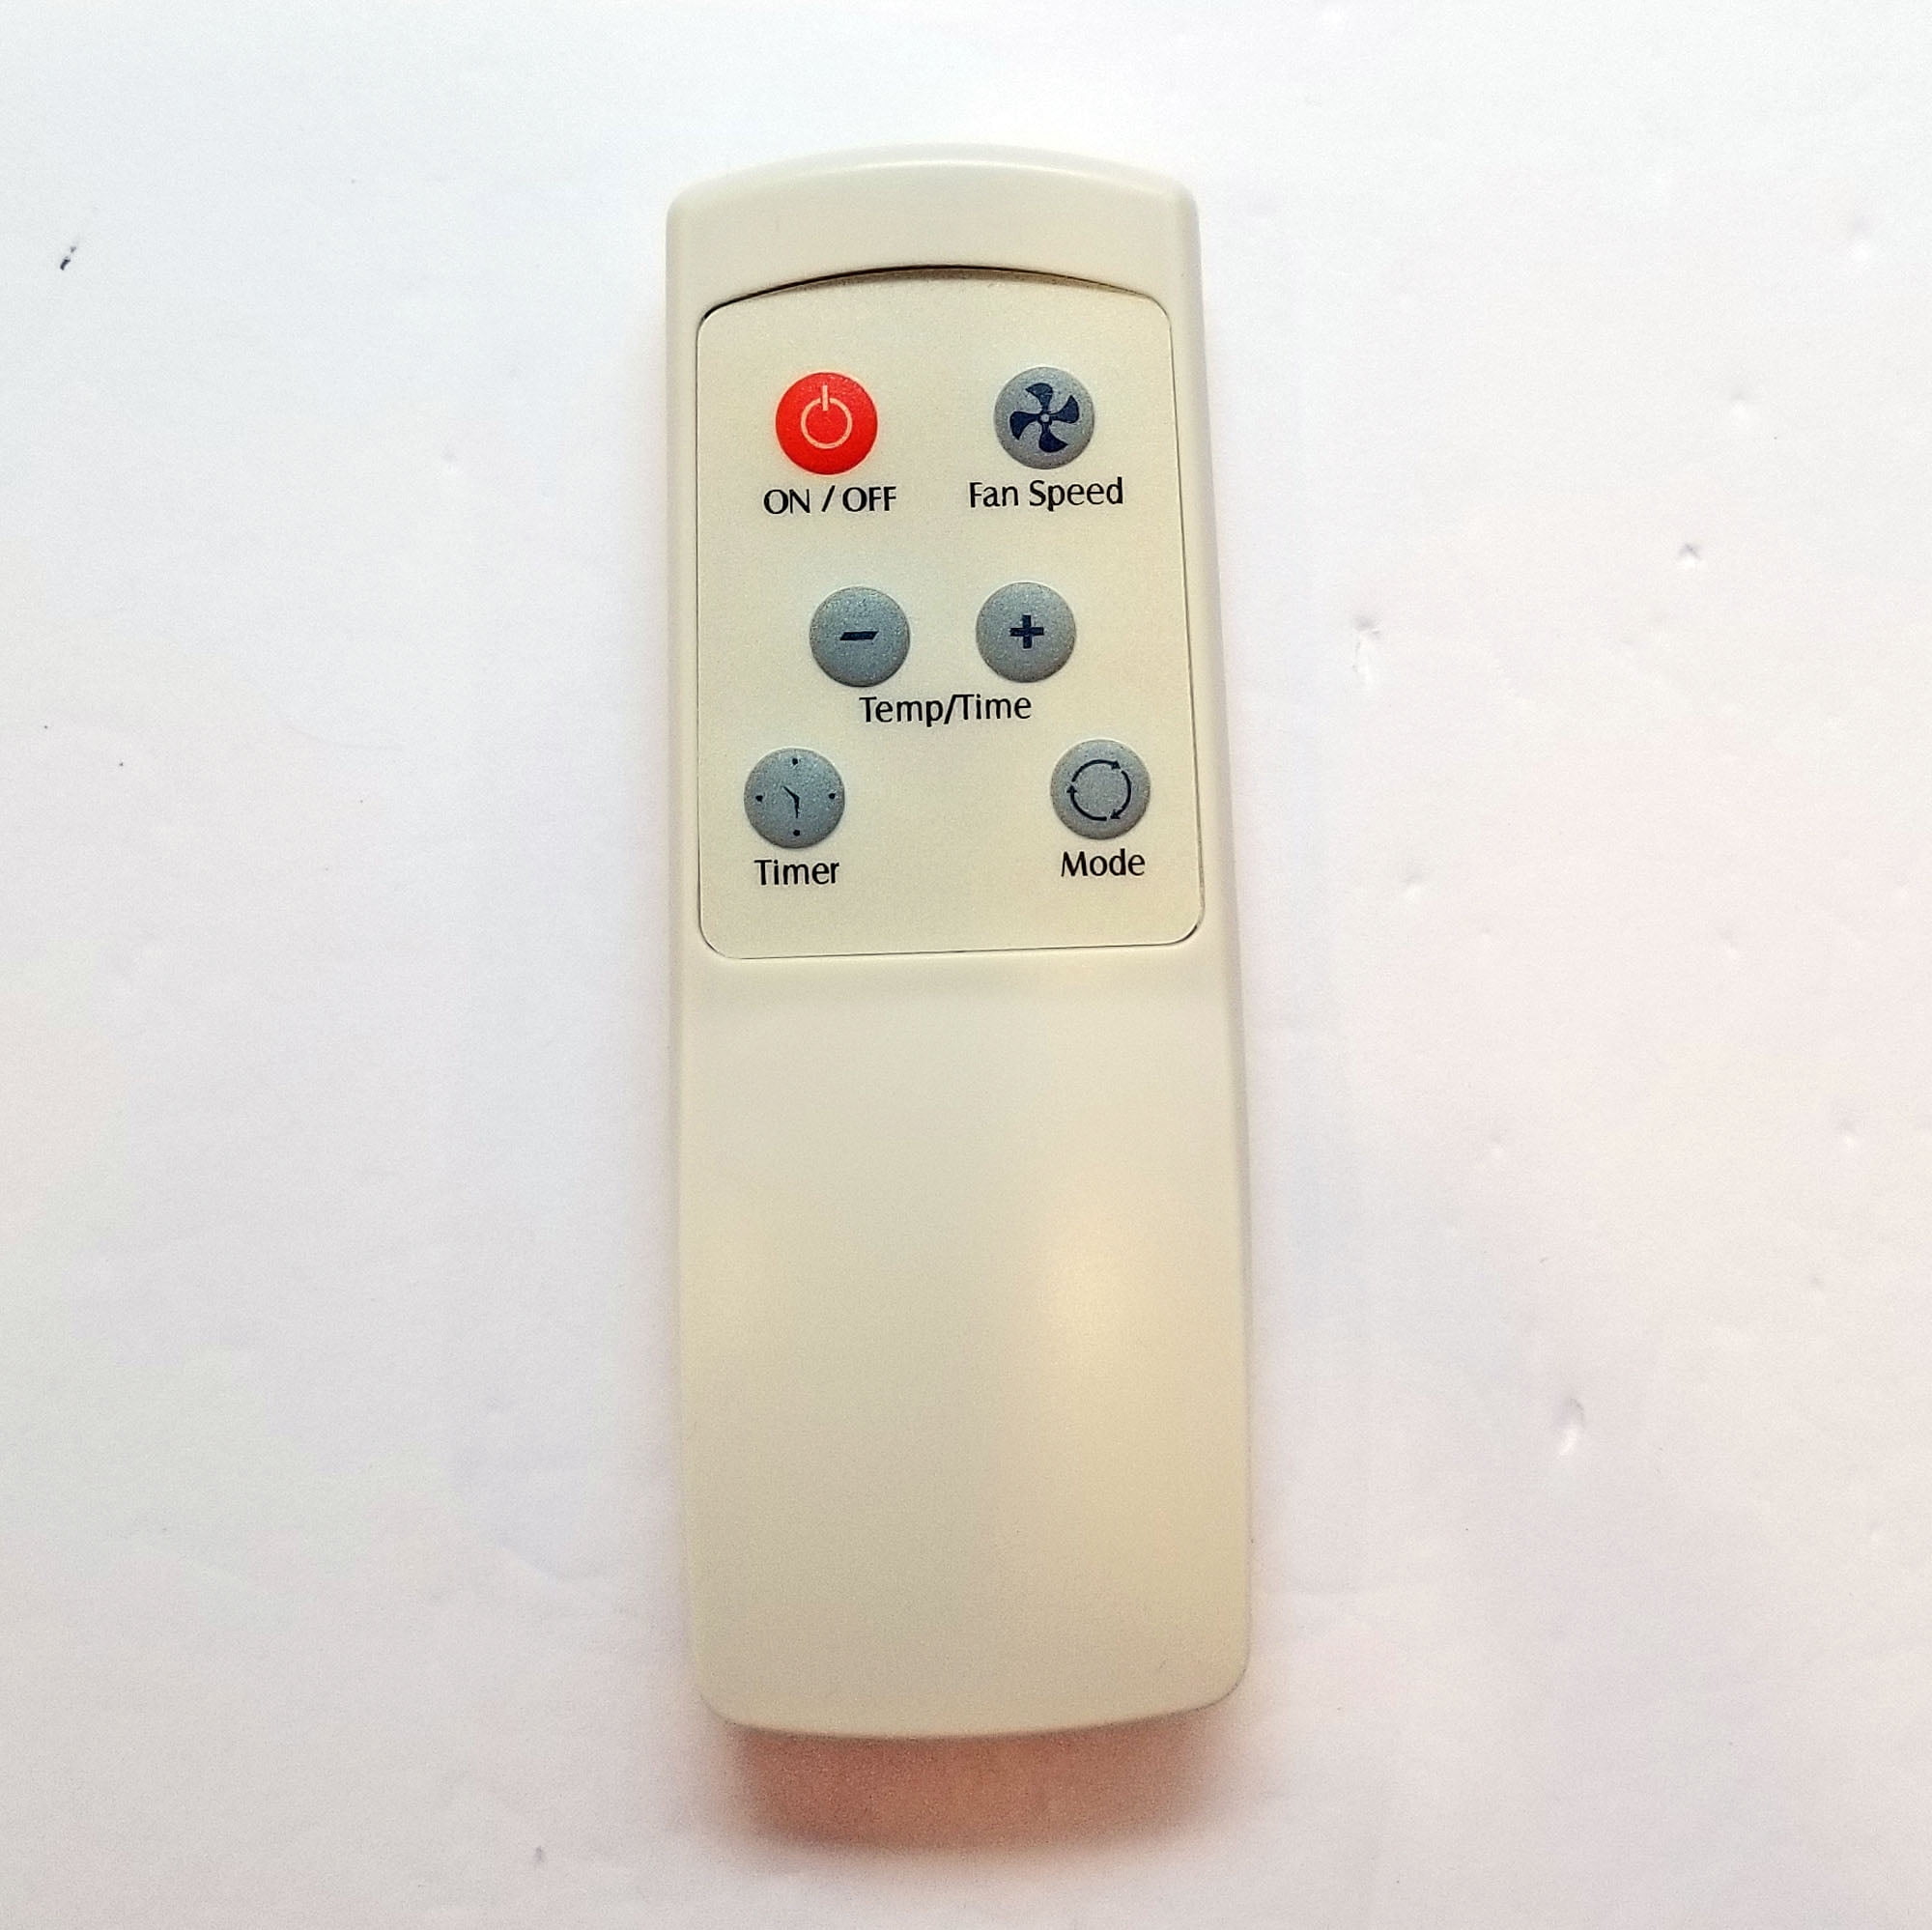 NEW FEDDERS Maytag Air Conditioner Remote Control  for 